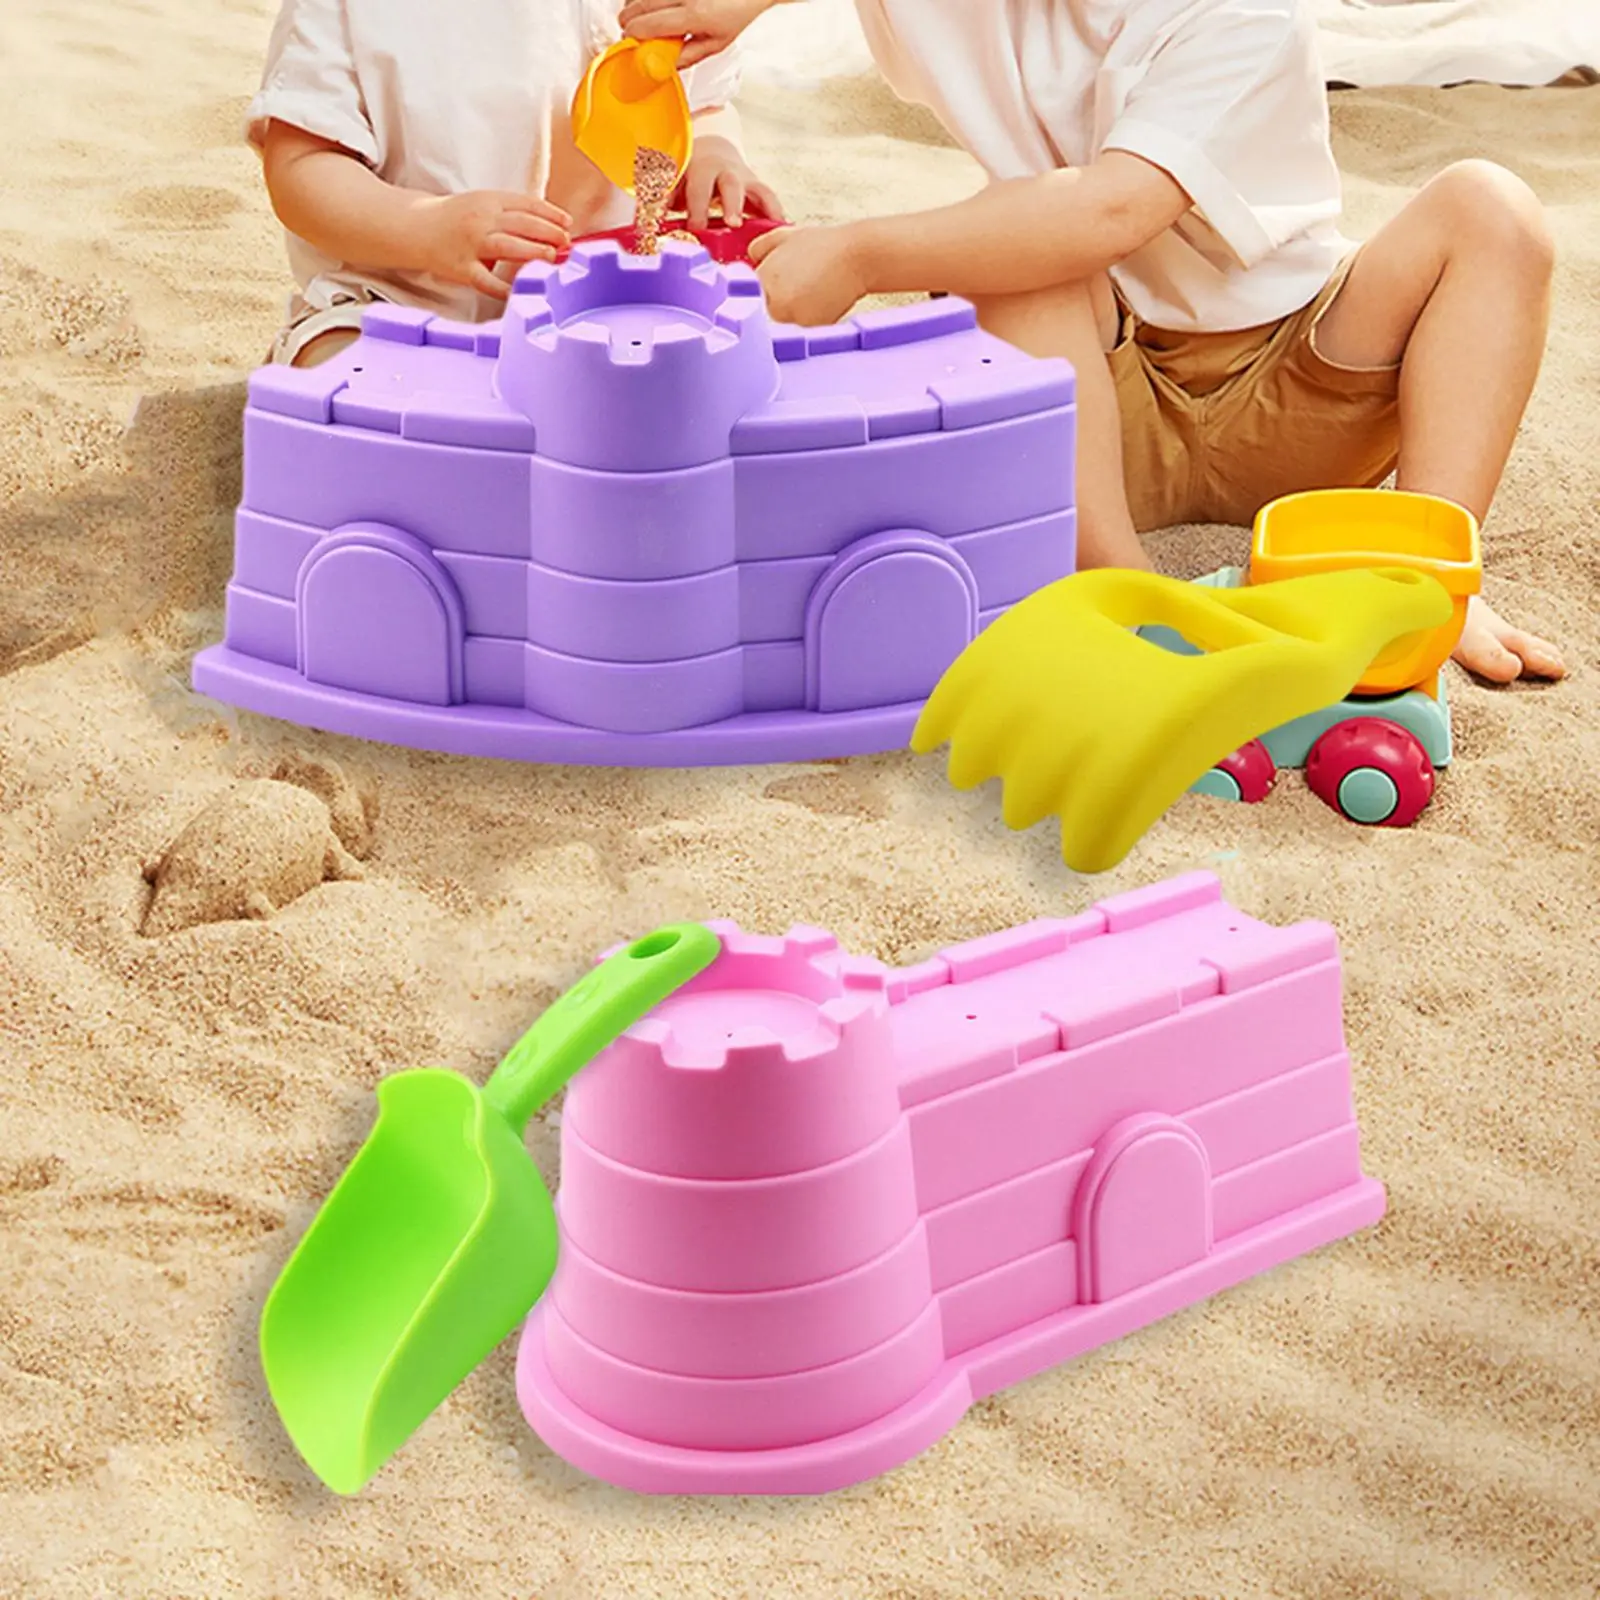 Sand Castle Play Set for Kids Sand Gadgets Snow Toys Sand Castle Toys for Beach for Children Adults Toddlers Girls Boys Winter